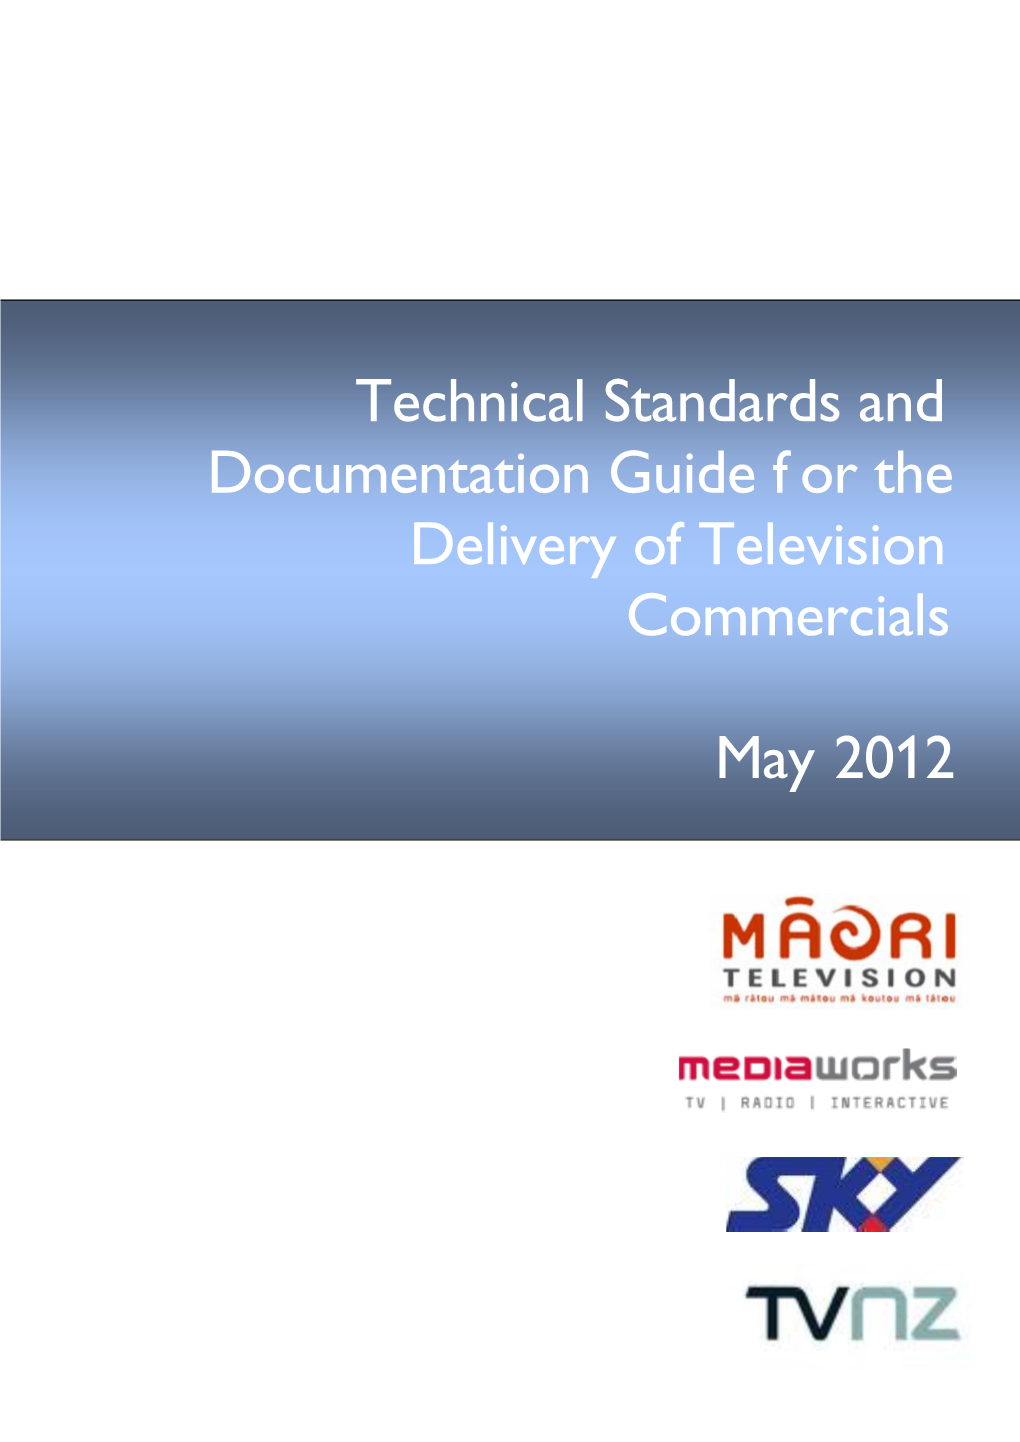 Technical Standards and Documentation Guide F Or the Delivery of Television Commercials May 2012